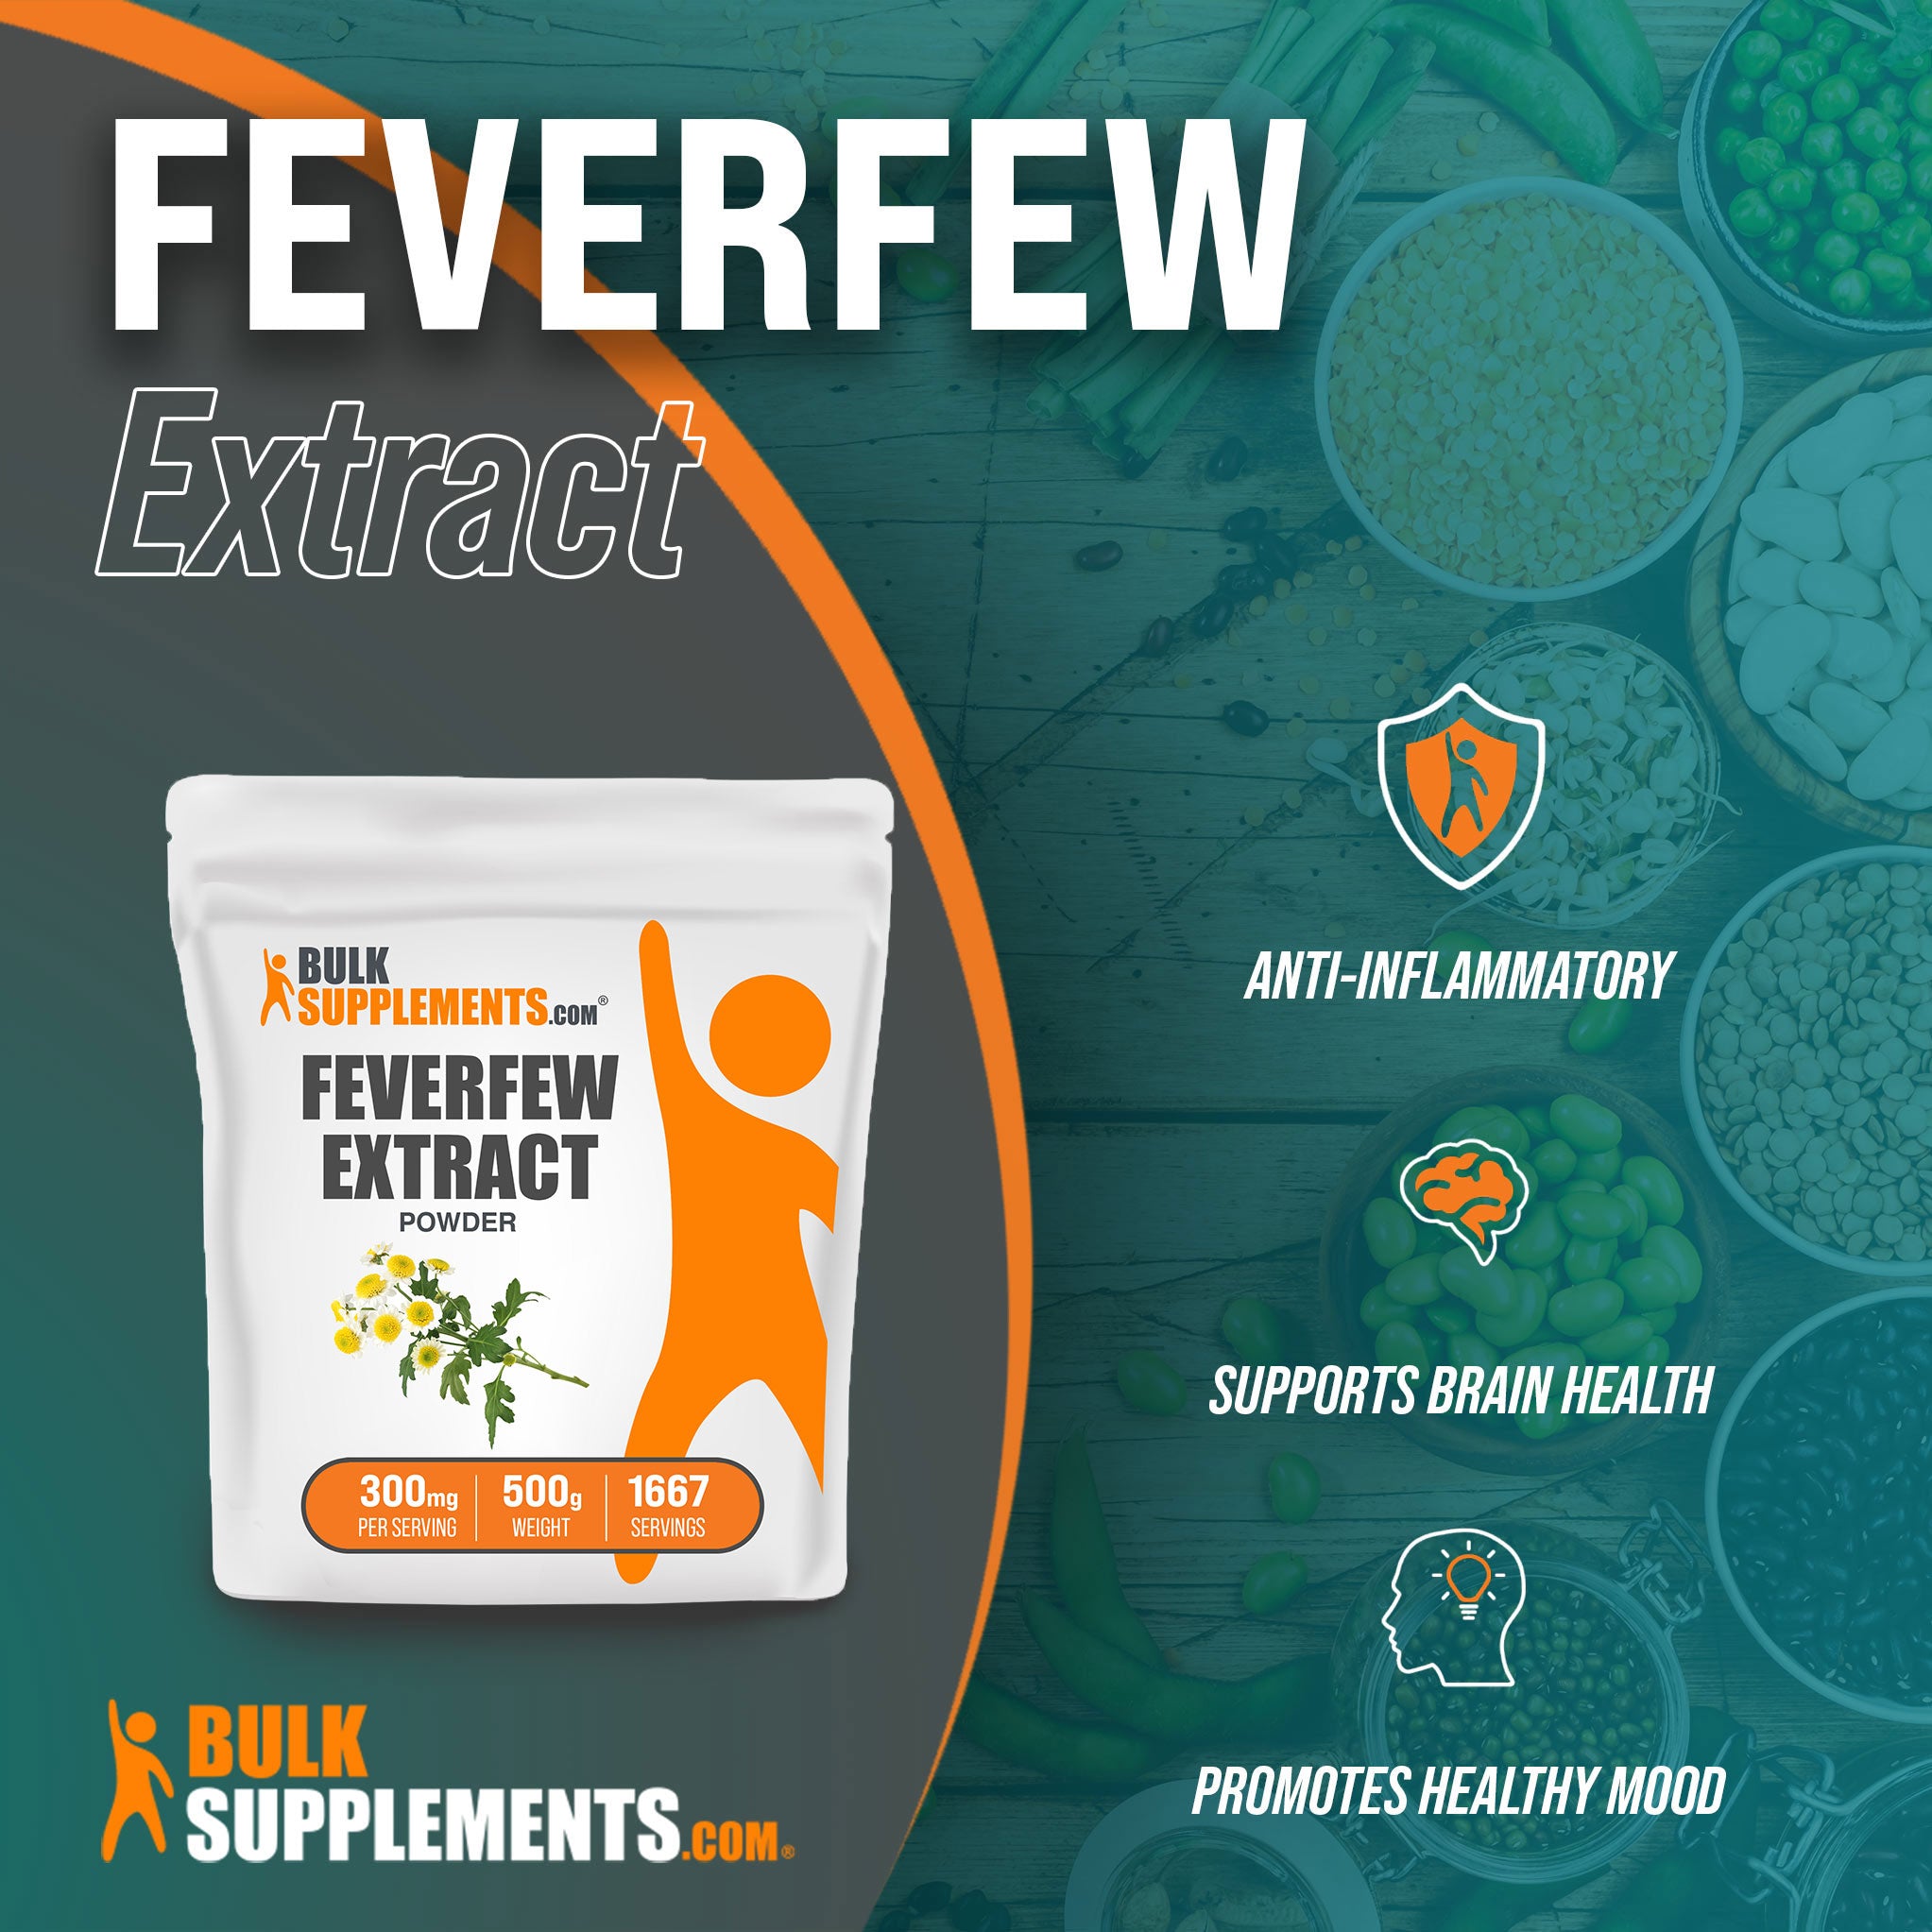 Benefits of Feverfew Extract; anti-inflammatory, supports brain health, promotes healthy mood